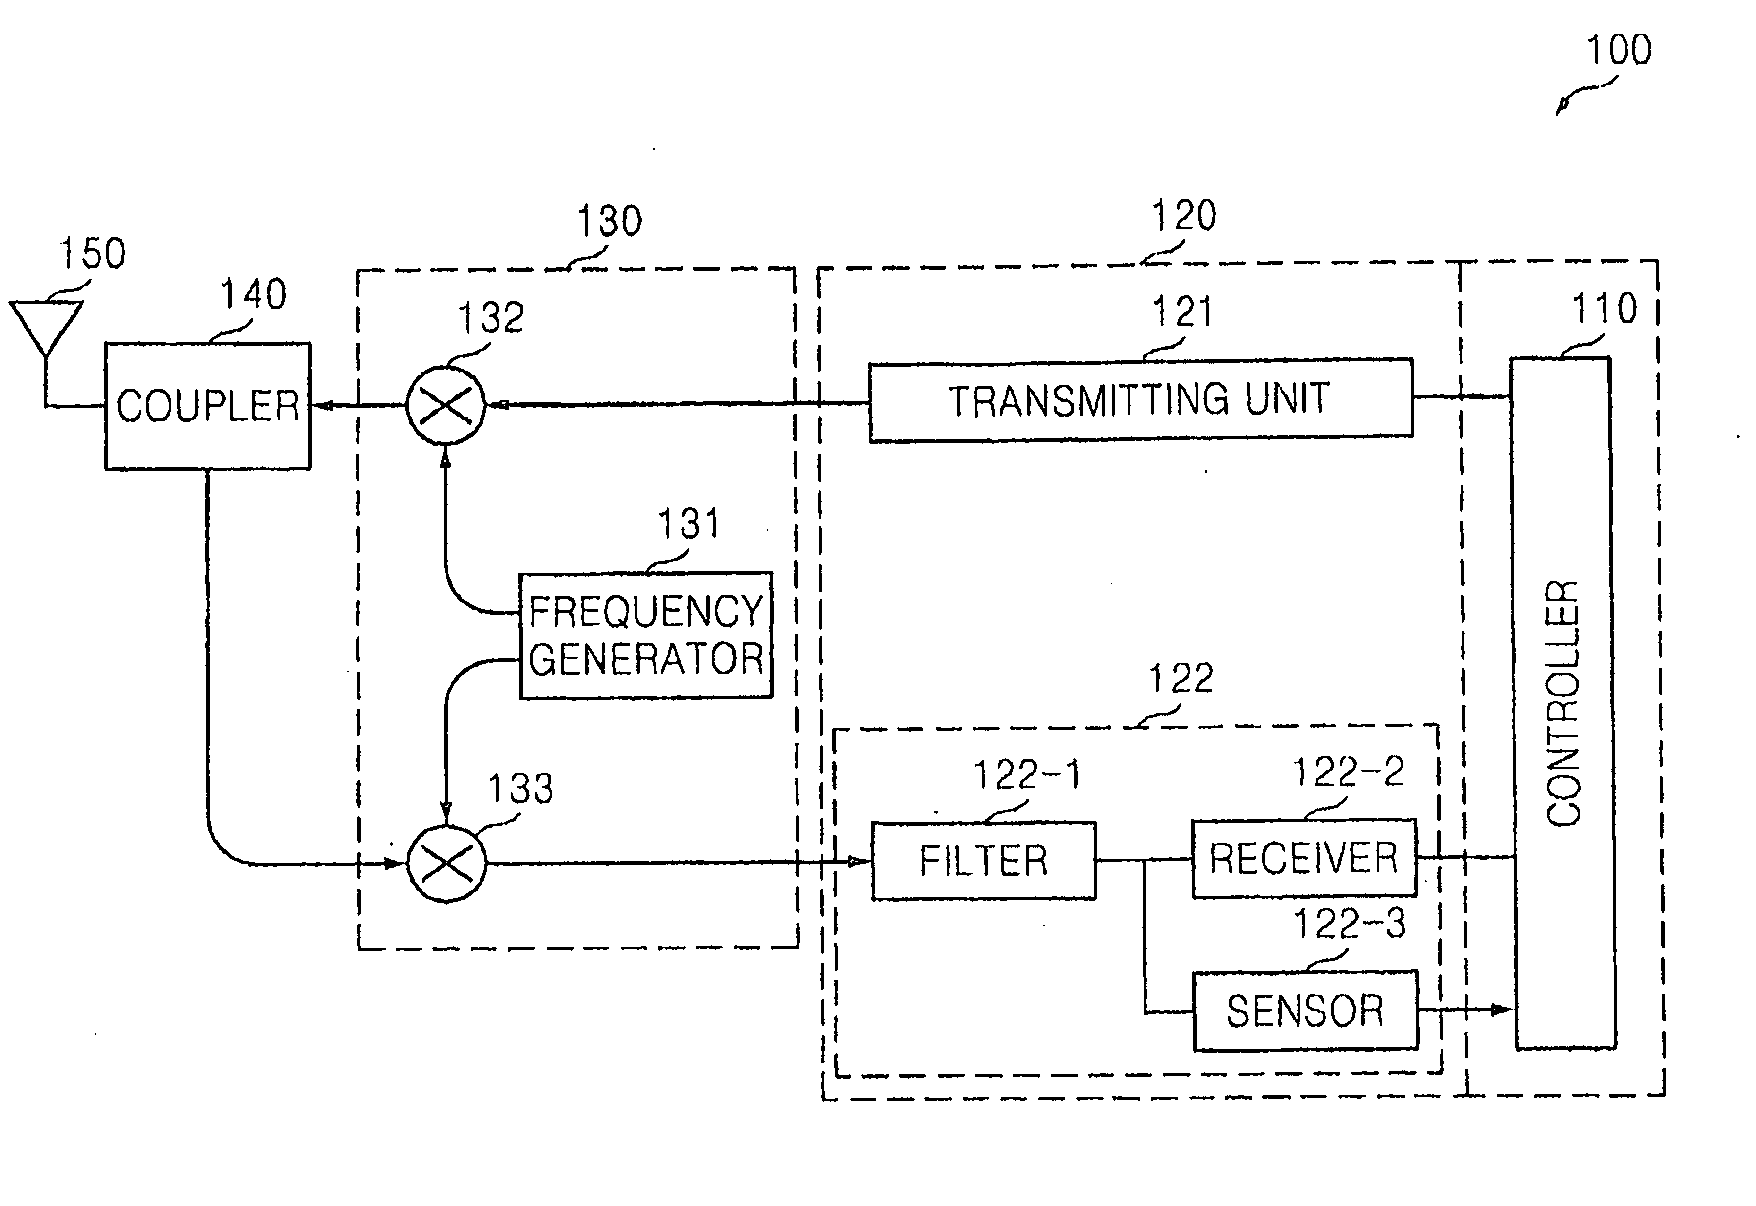 Radio frequency identification interrogator and method of operating the same